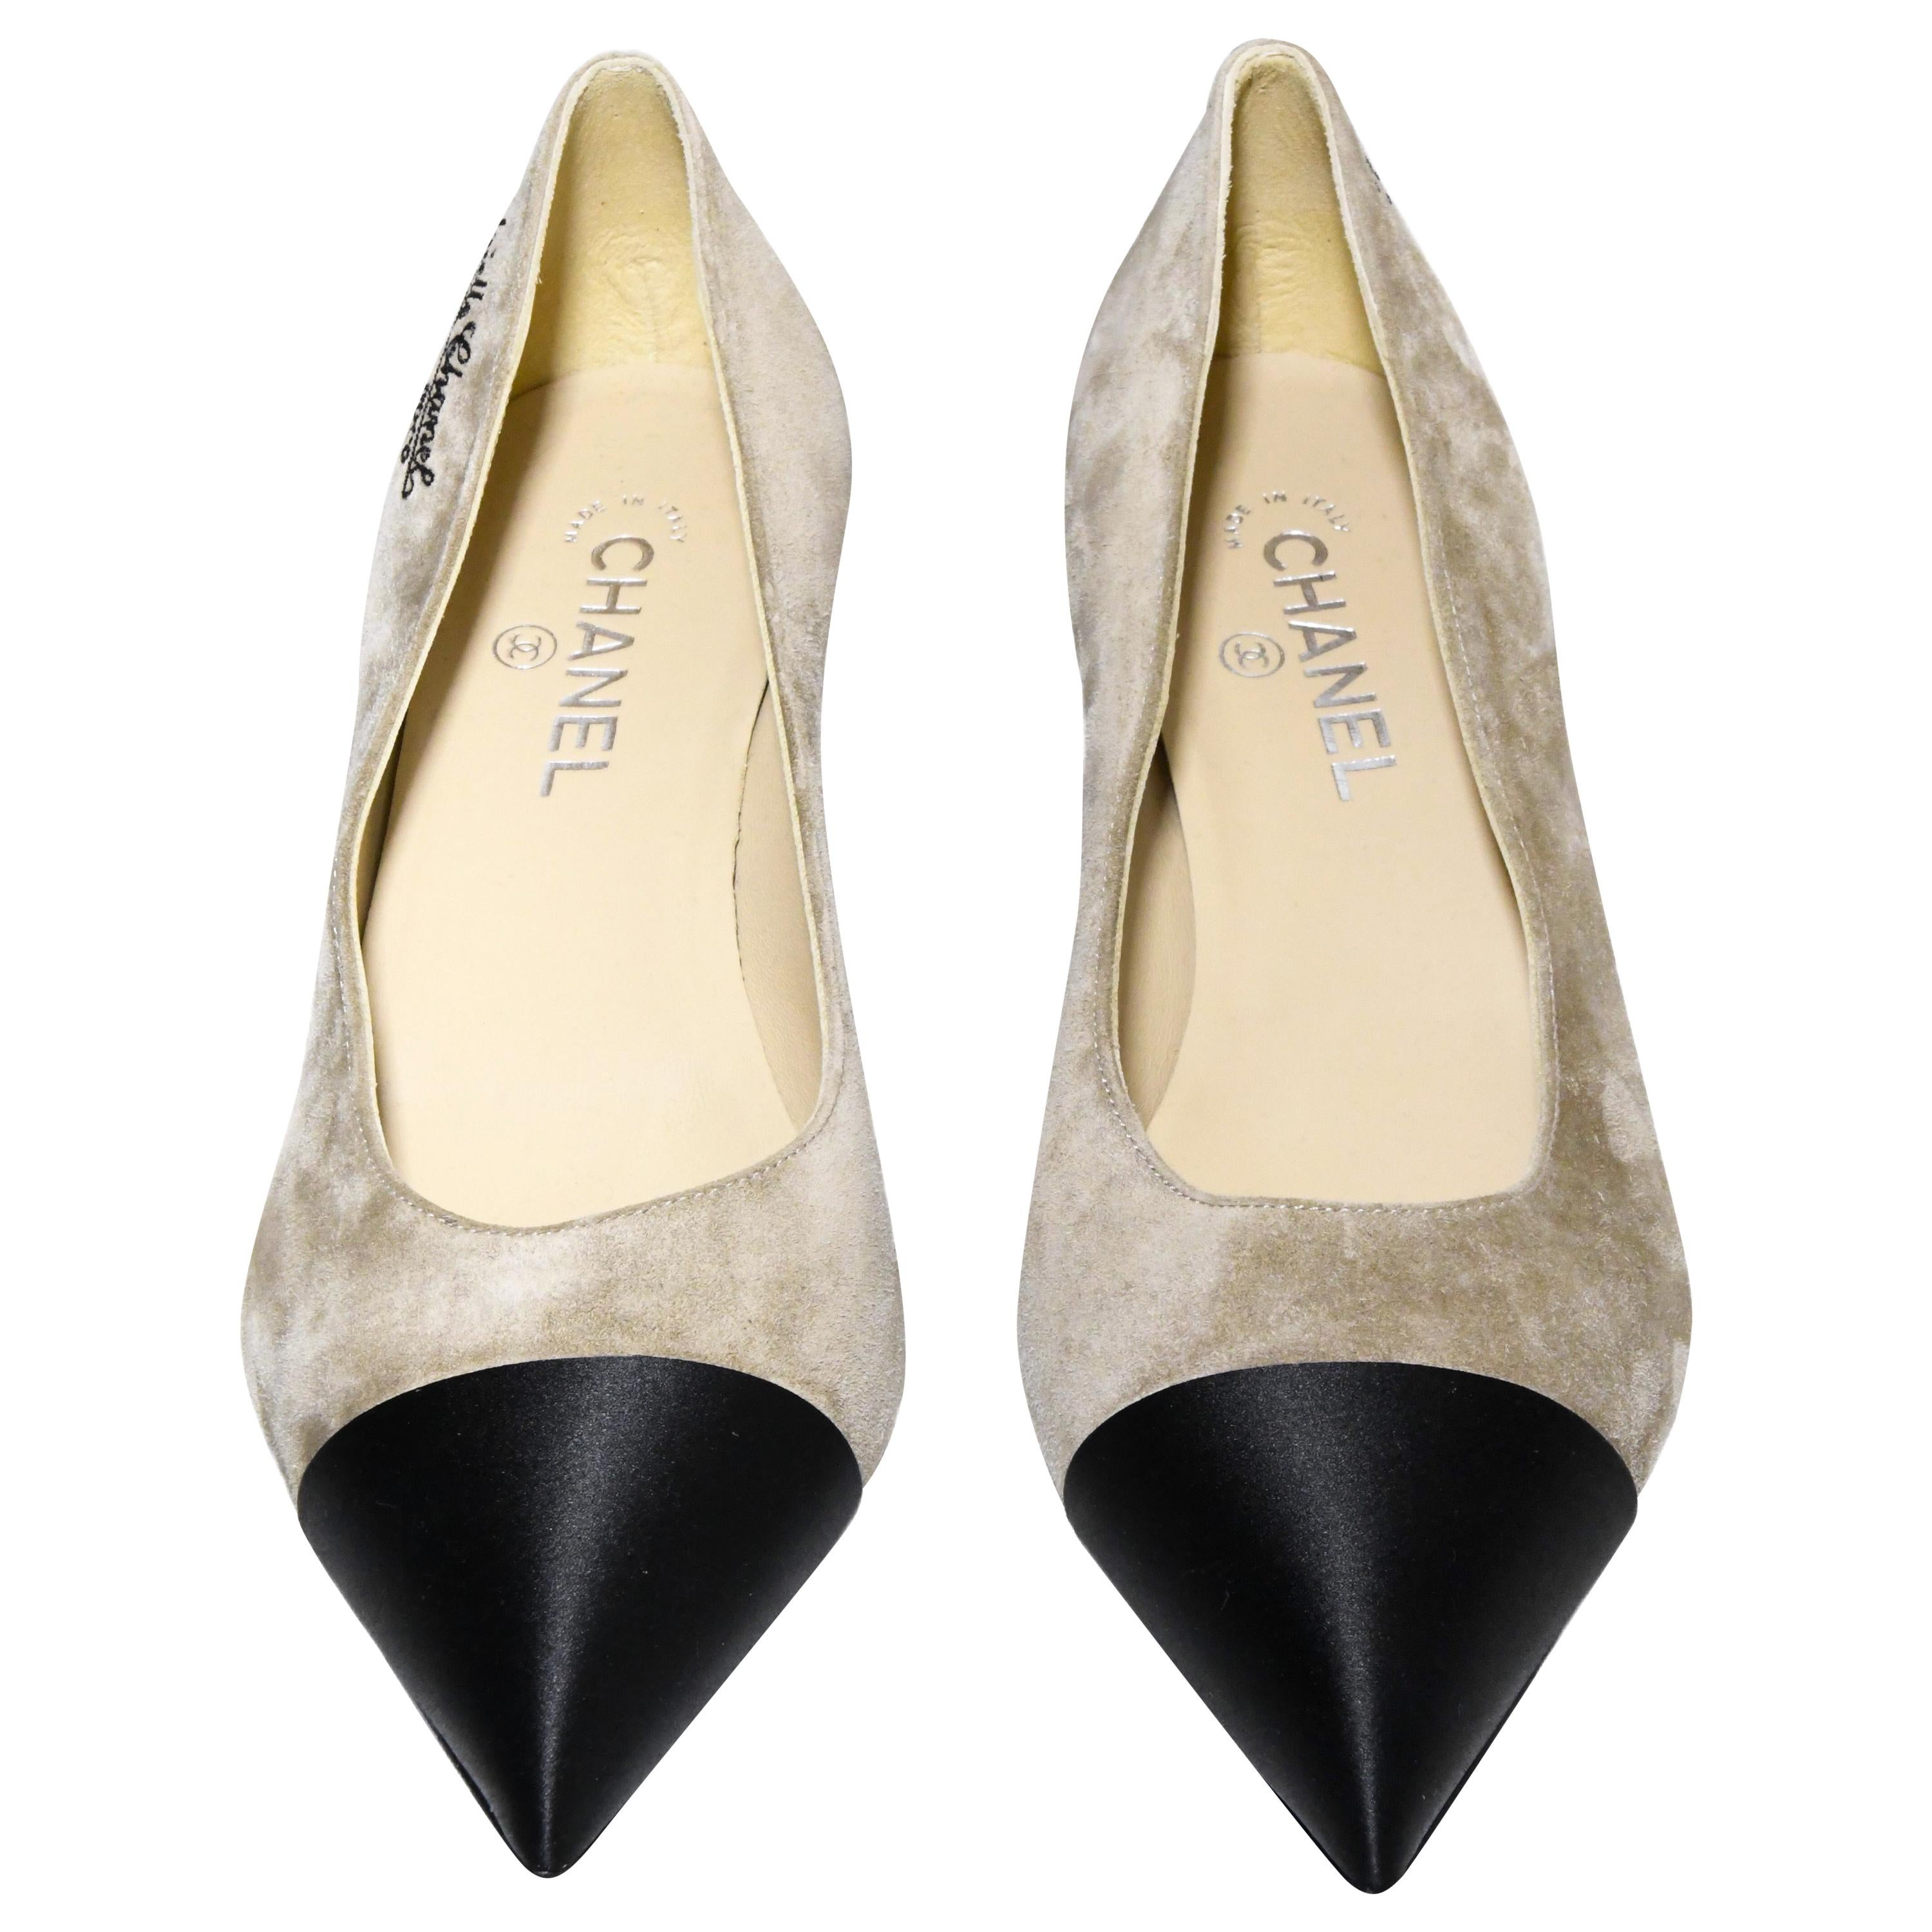 Chanel Two Tone Grey and Black Pointed Toe Pumps 